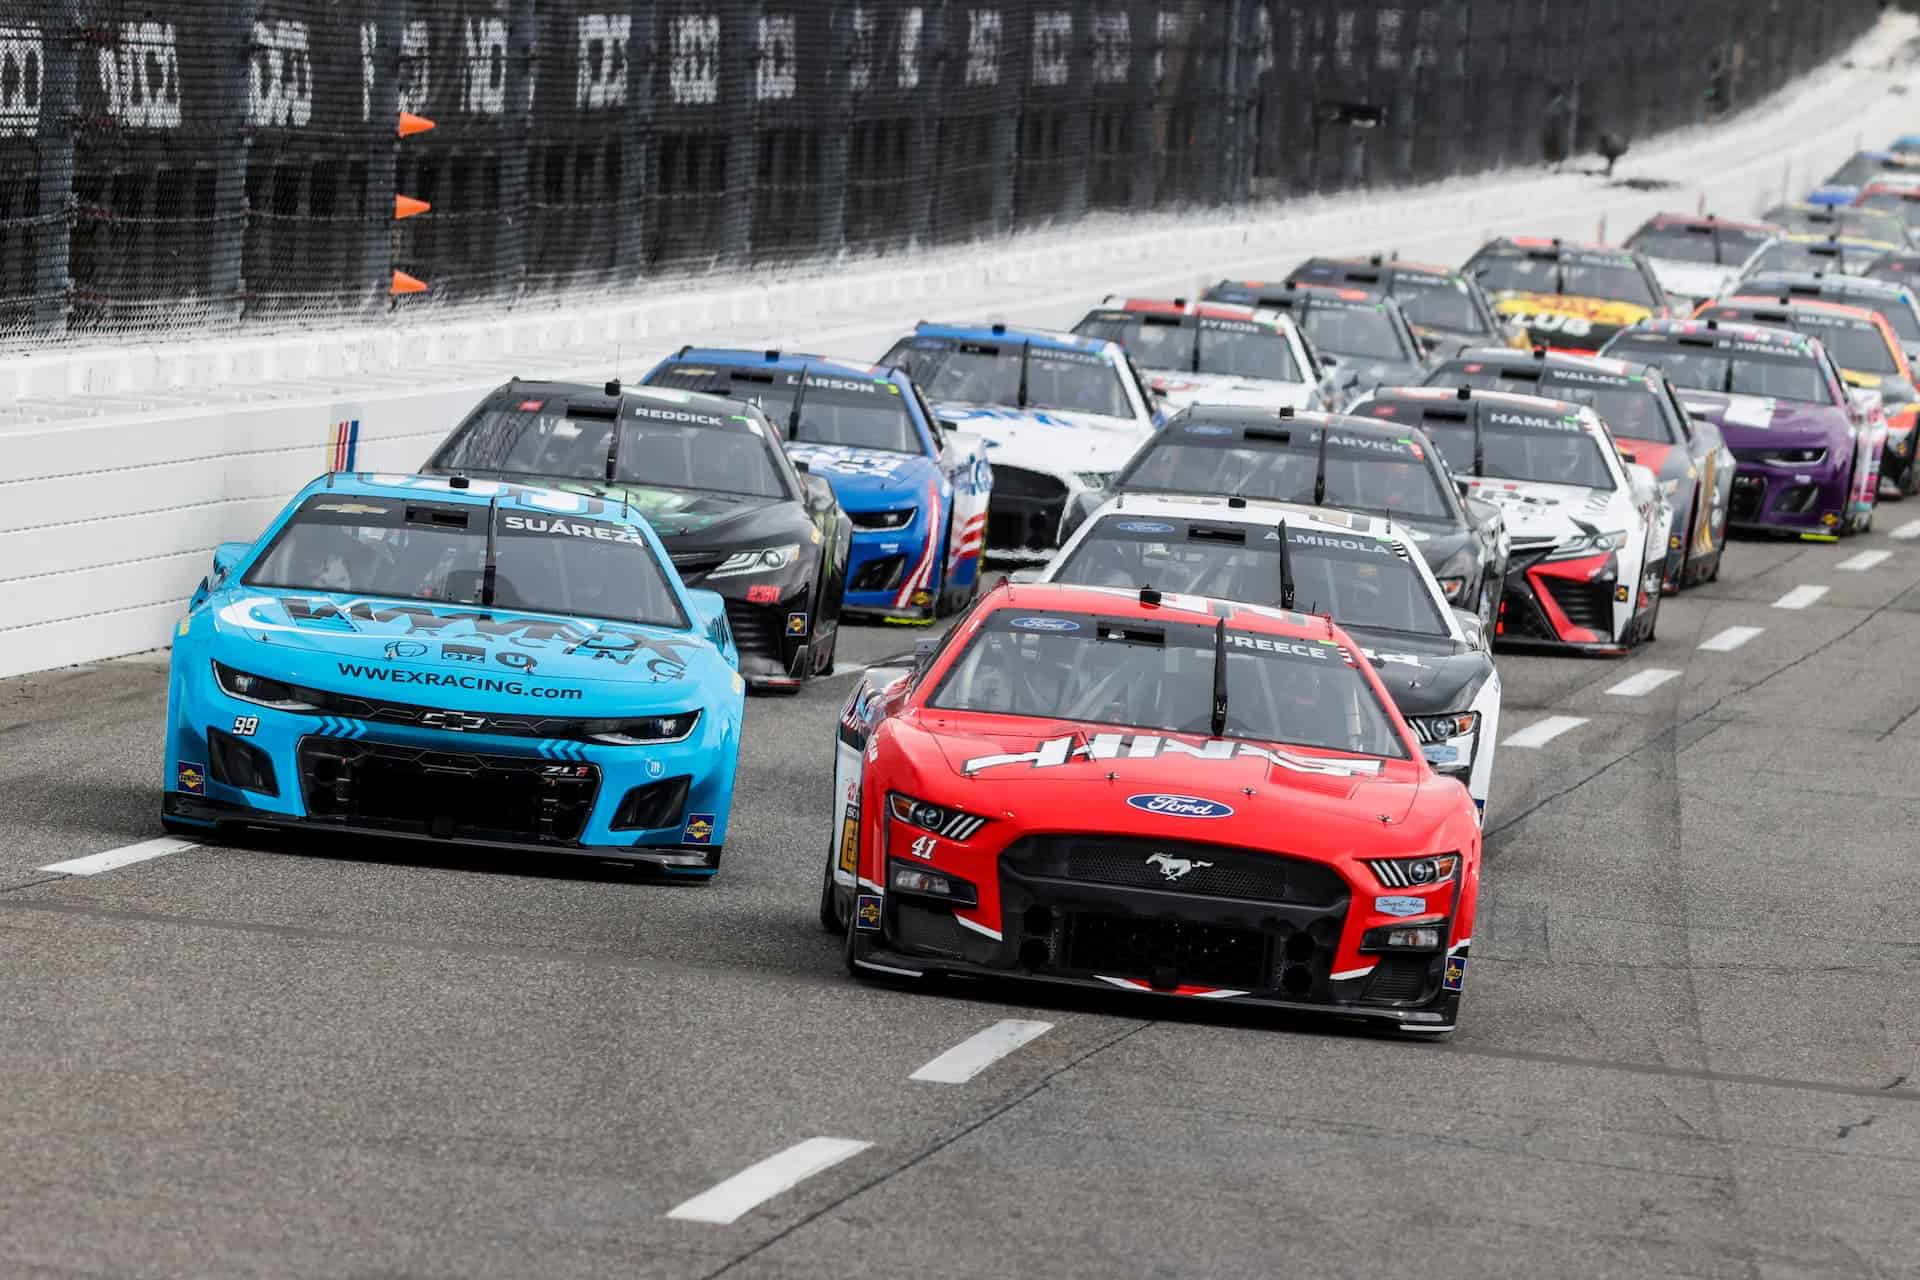 Ryan Preece sat on pole and won the opening stage in Sunday's NOCO 400 at Martinsville Speedway. But a pit road speeding penalty relegated him to a 15th place finish. Photo by Rachel Schuoler Photography.